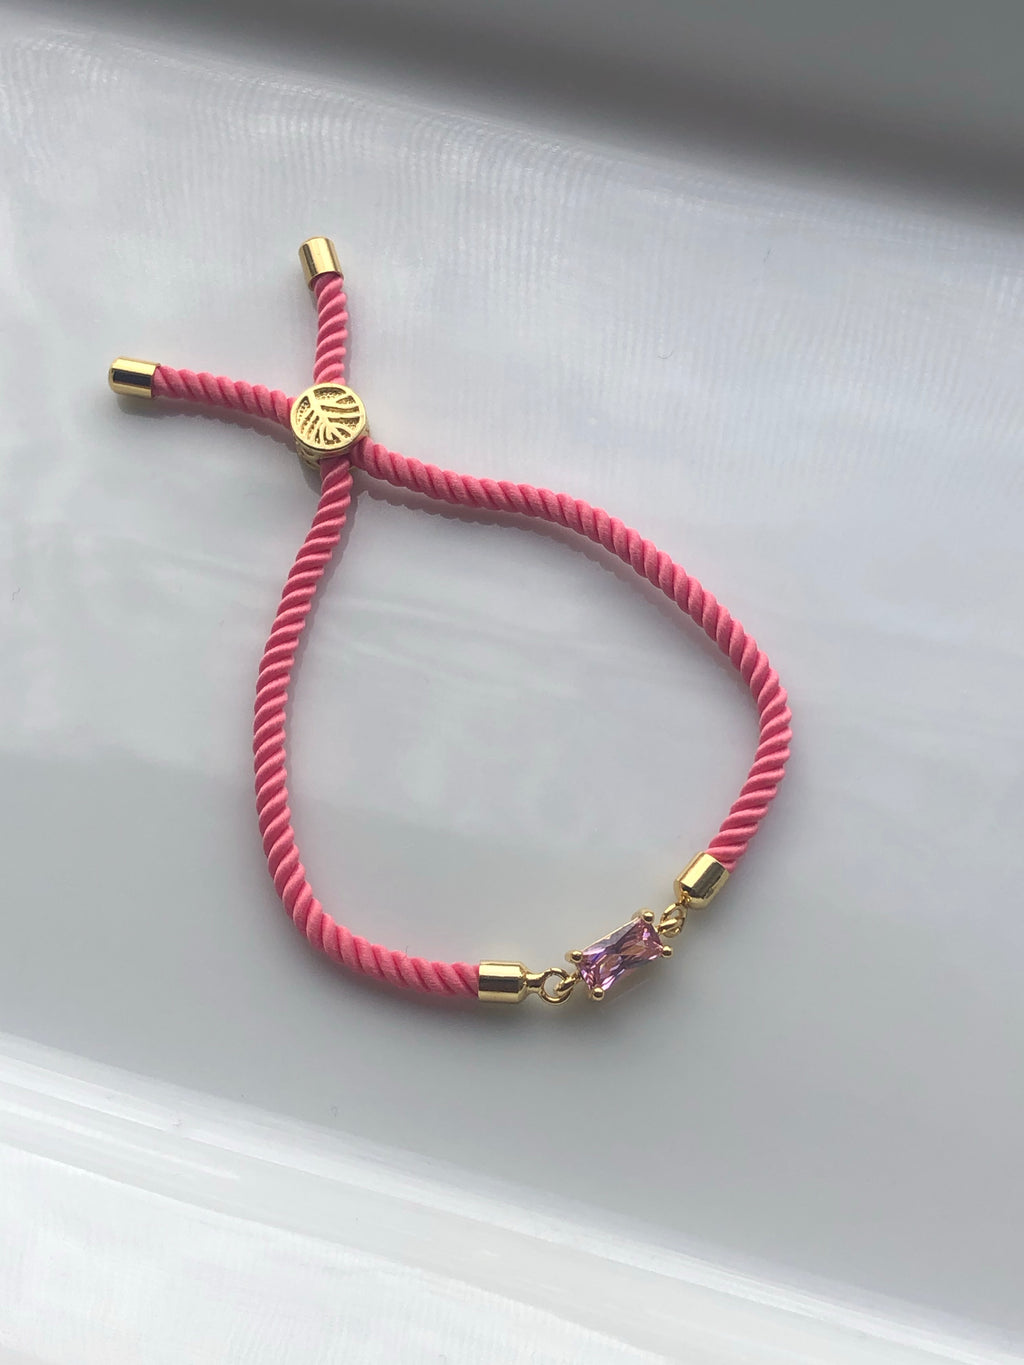 The Conchita Bracelet - All Proceeds to Support Planned Parenthood